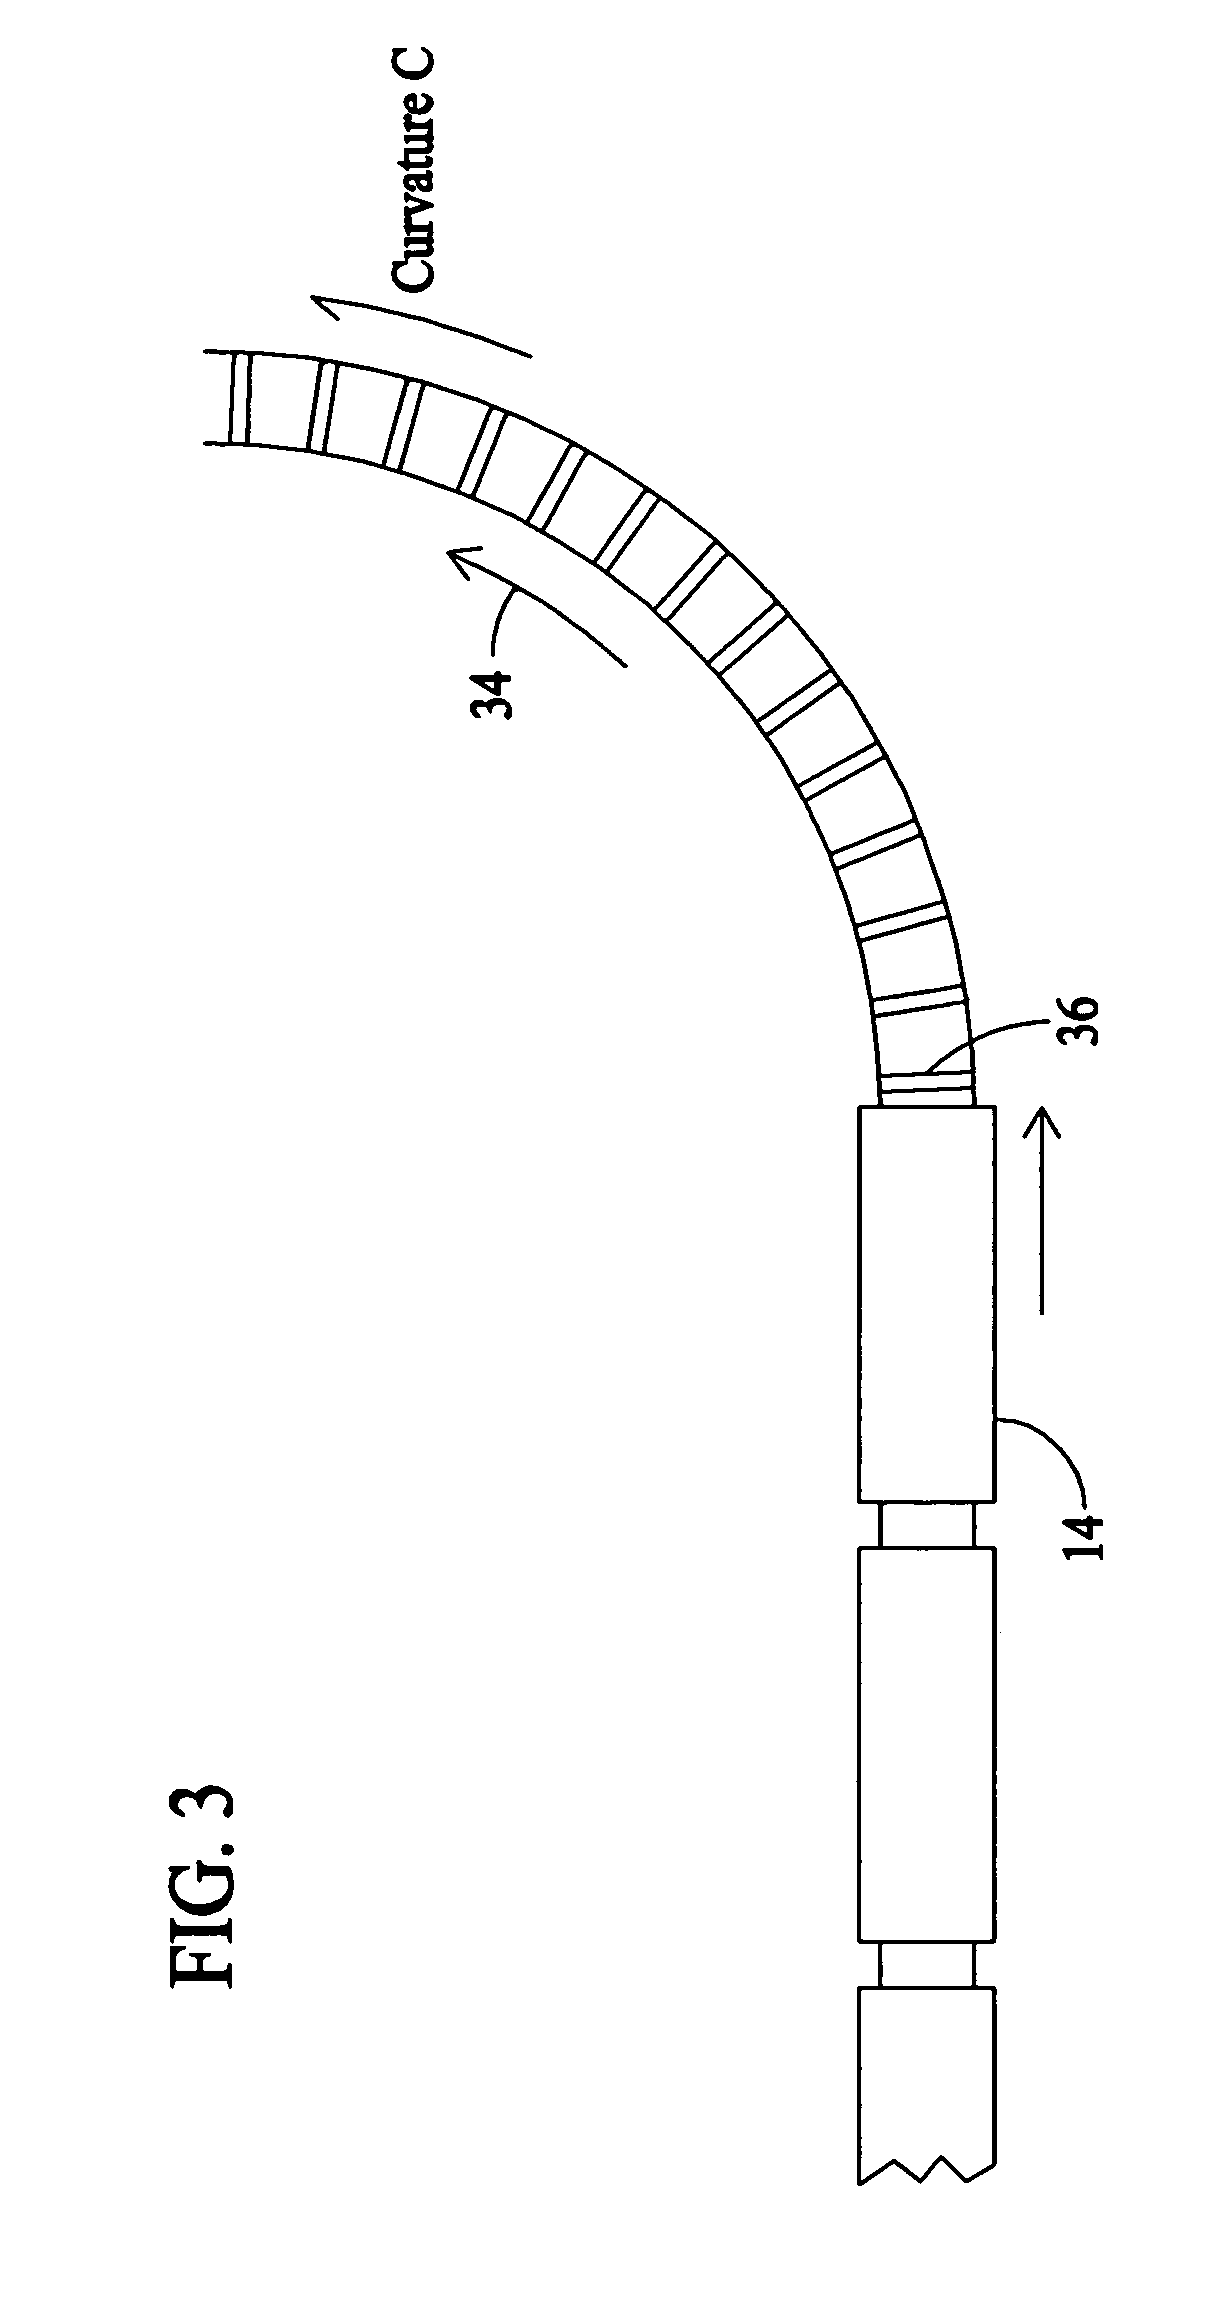 Methods and apparatus for measuring navigational parameters of a locomotive